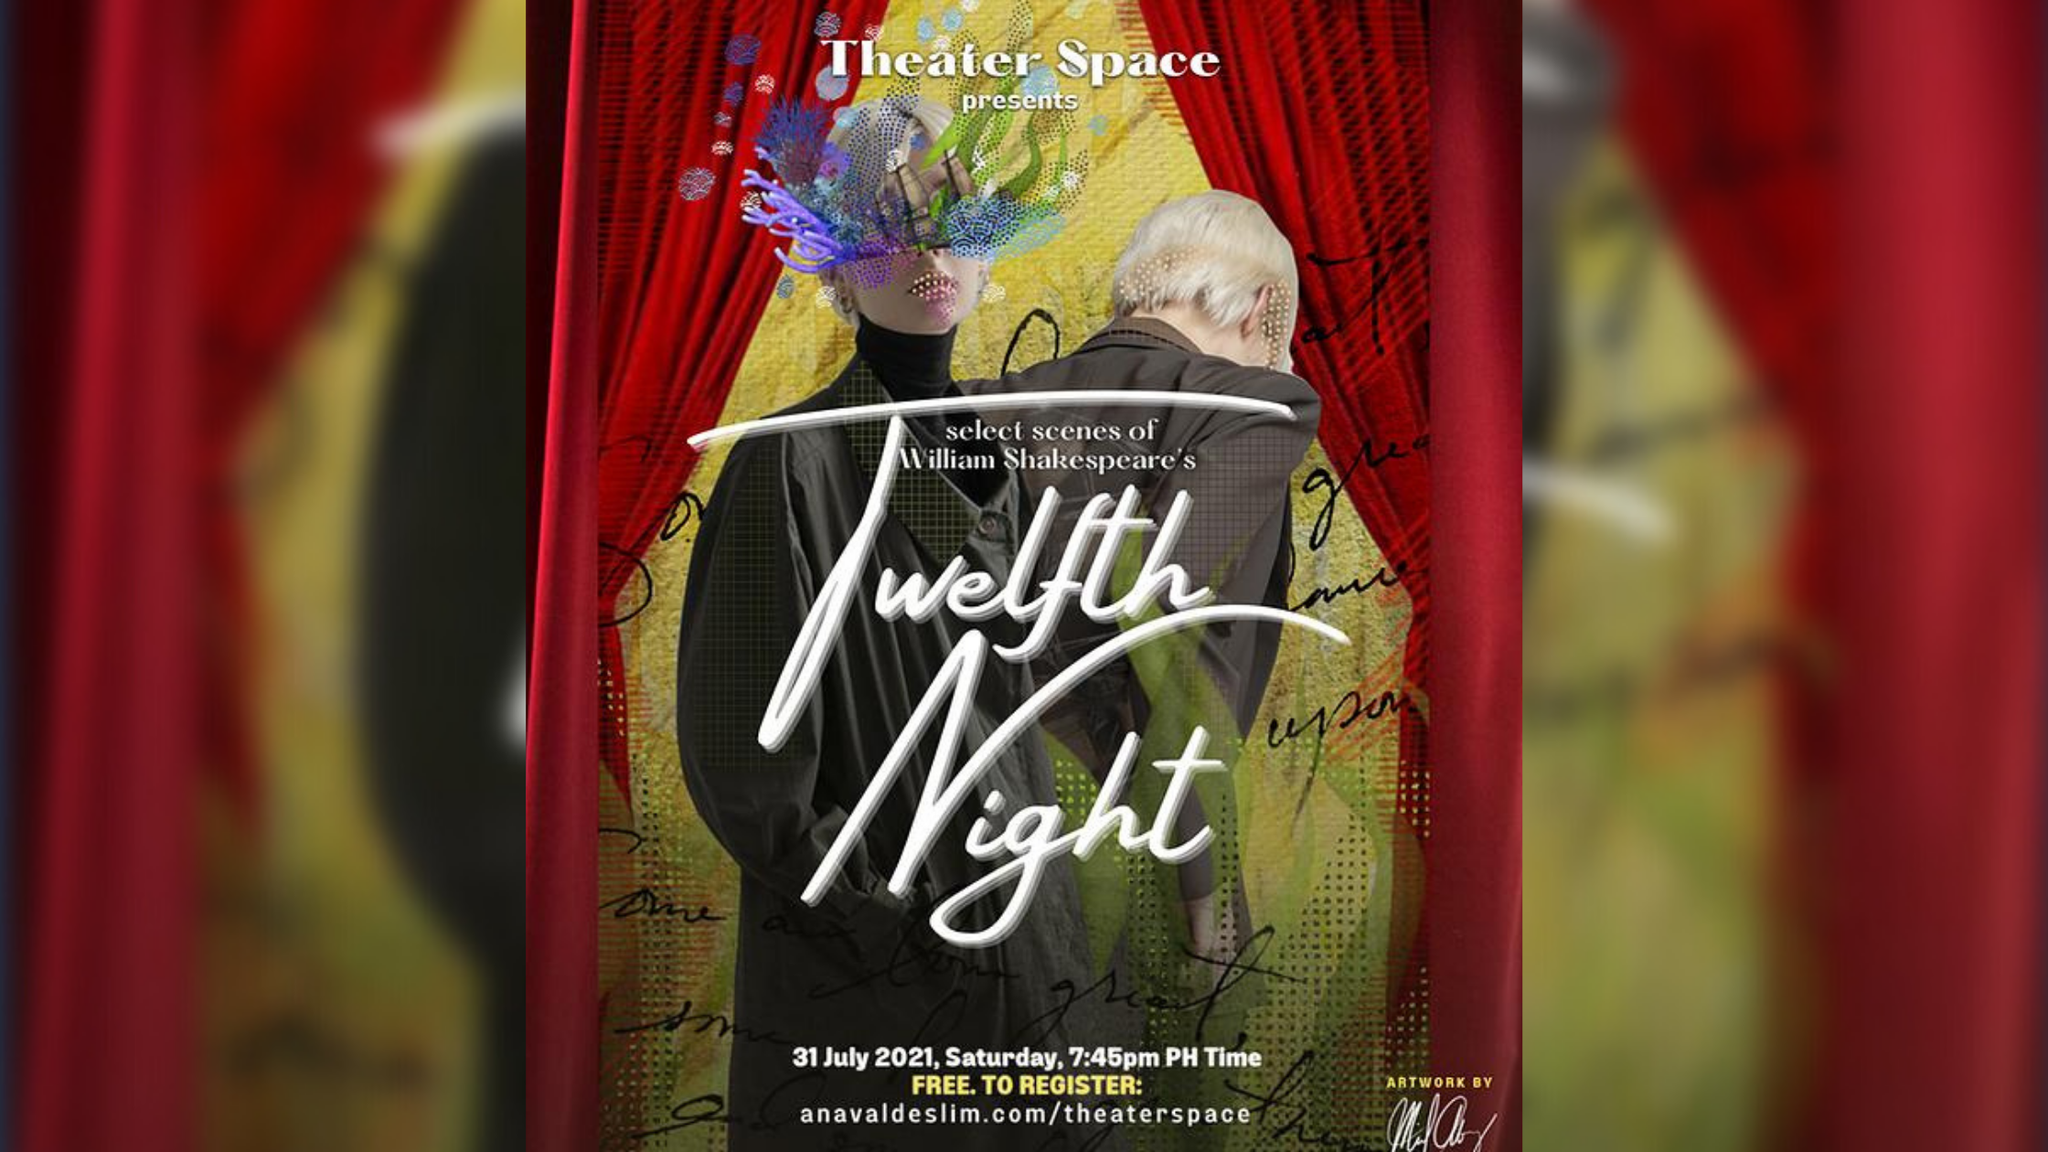 Local ‘Twelfth Night’ Online Production to Stream Live